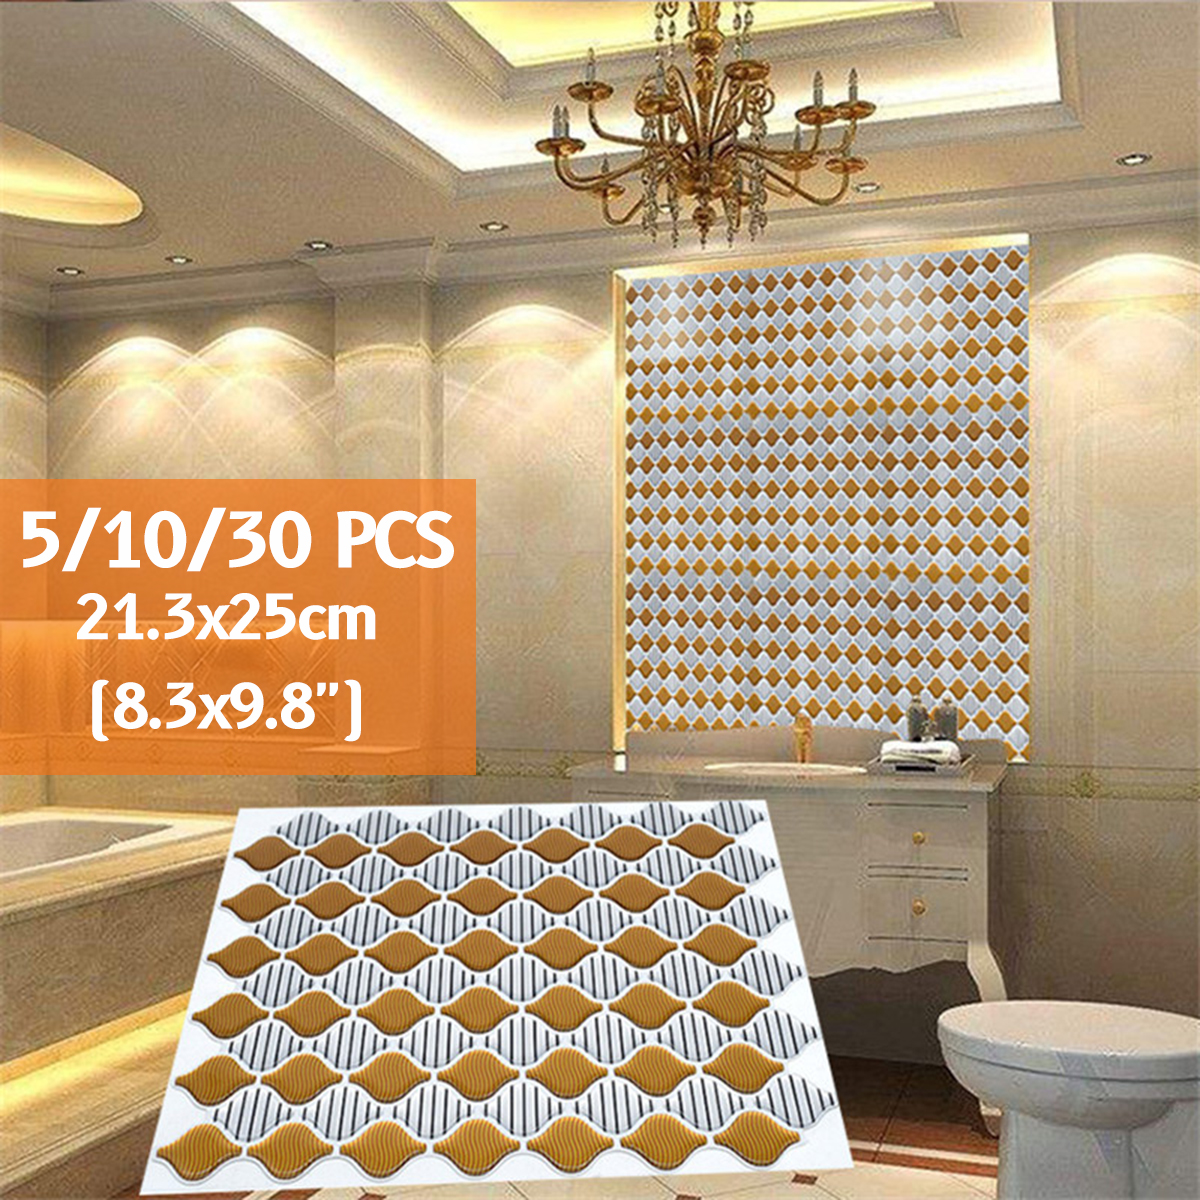 3D-Wall-Sticker-Waterproof-Wall-Tile-Decal-Kitchen-Home-Living-Room-DIY-Decoration-213x25cm-1824204-1